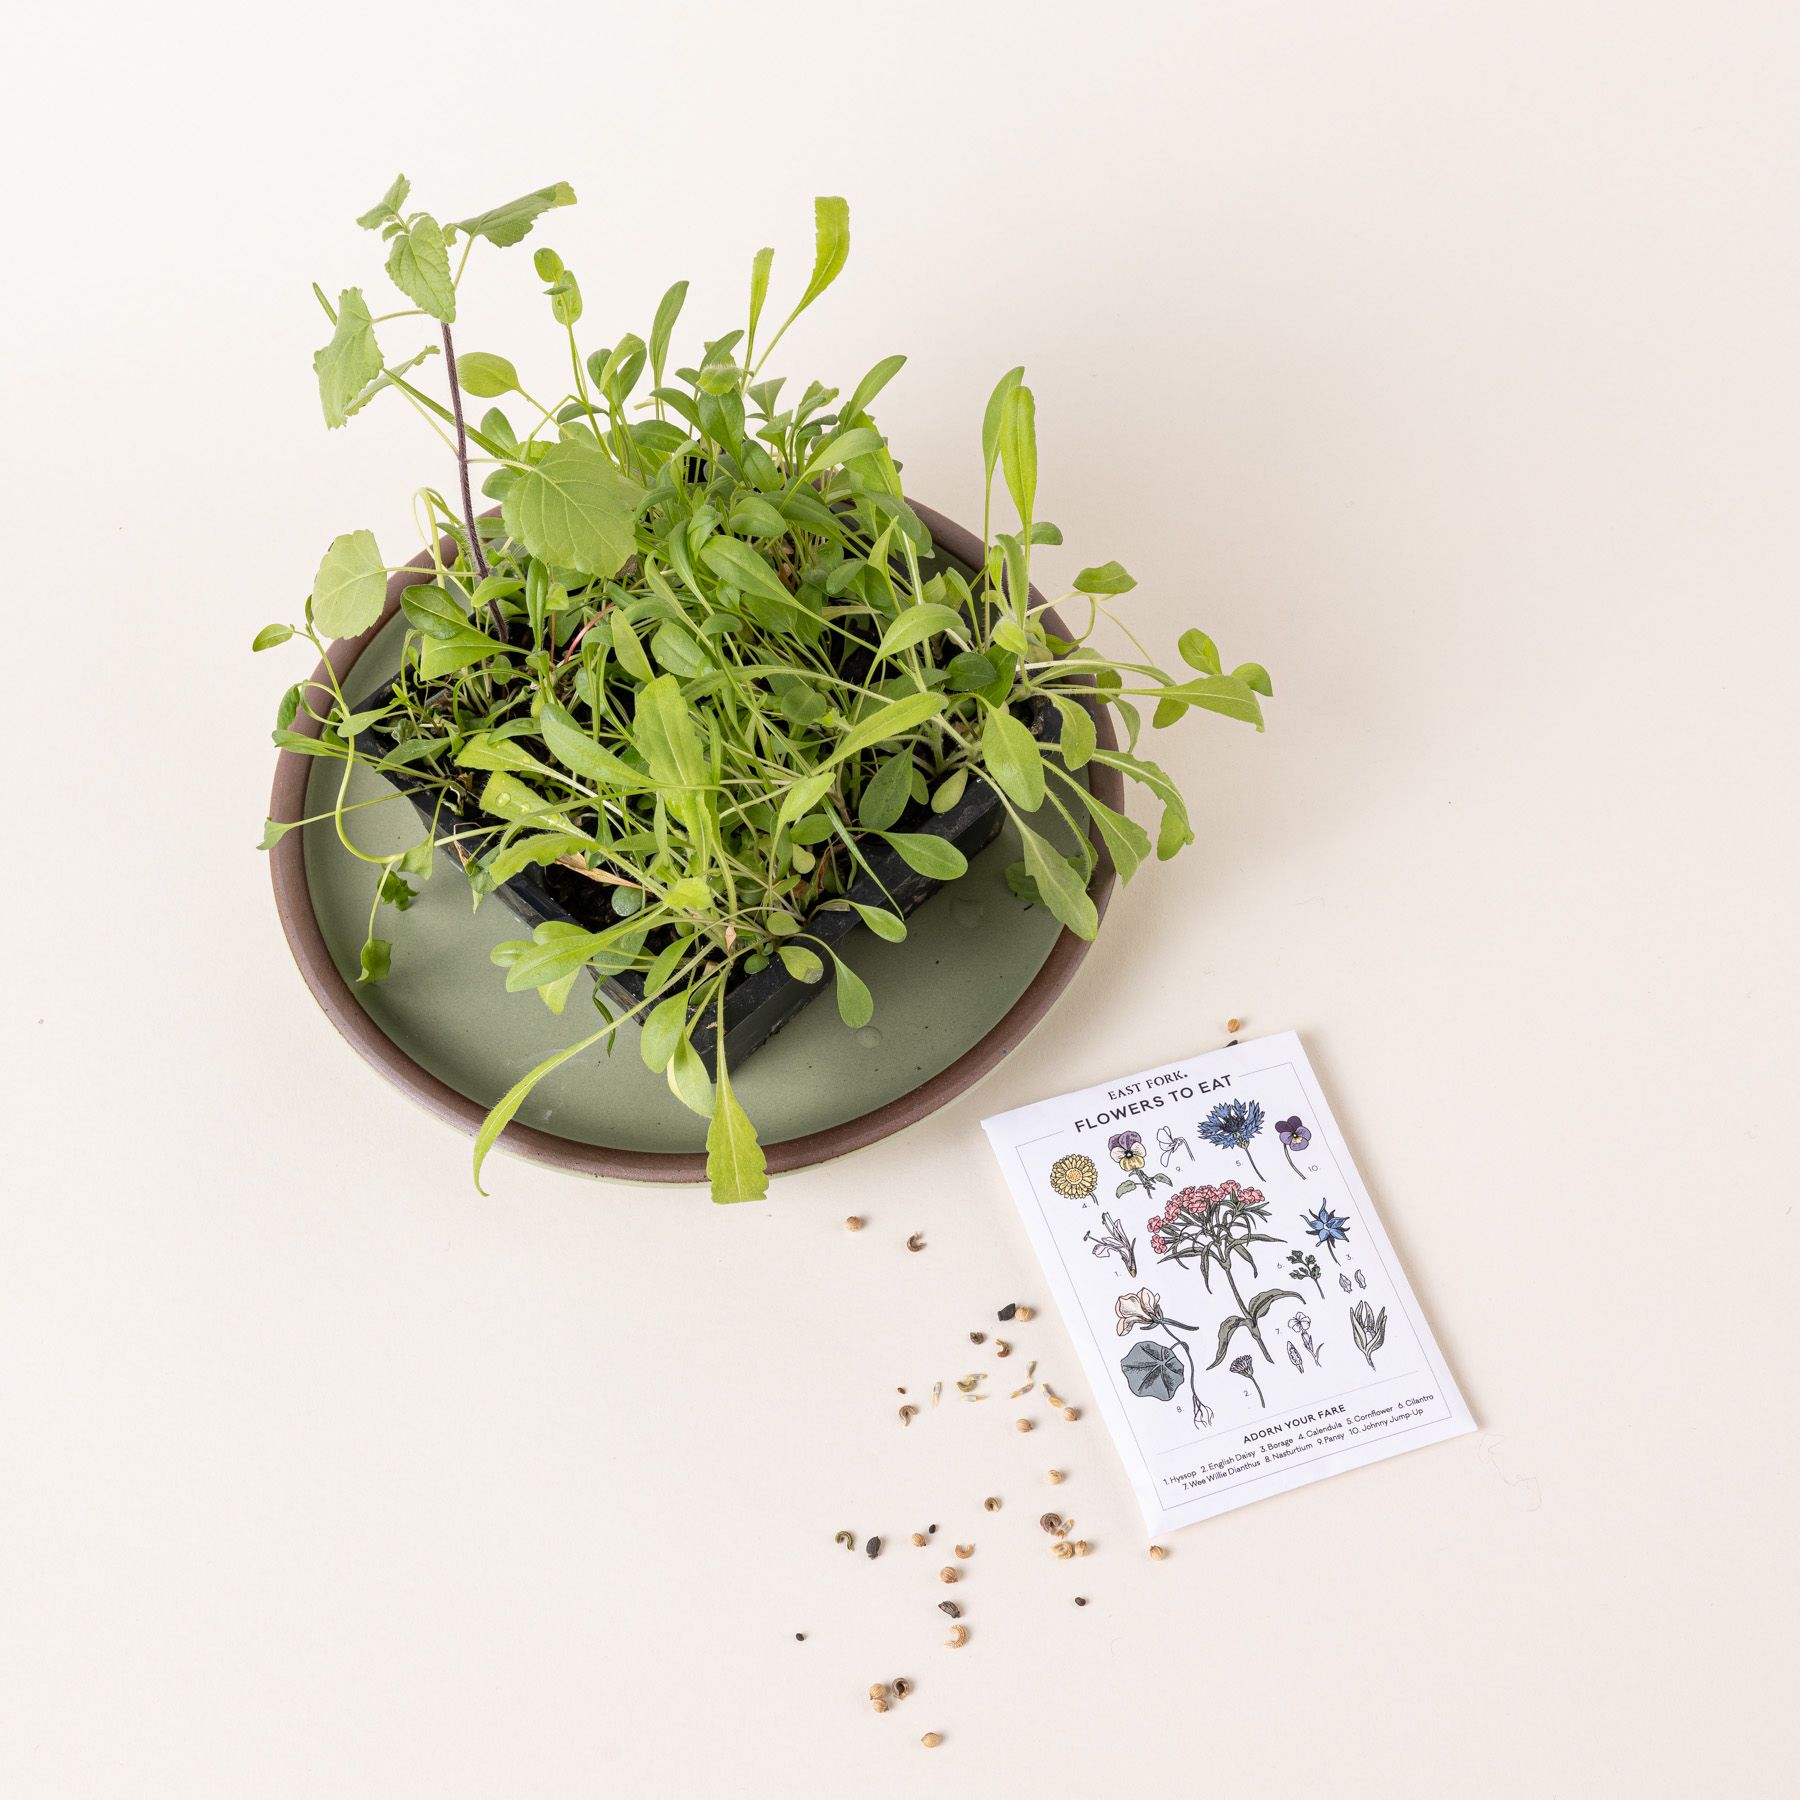 A white seed pack with floral illustrations on it sits next to a healthy green plant in a bowl.